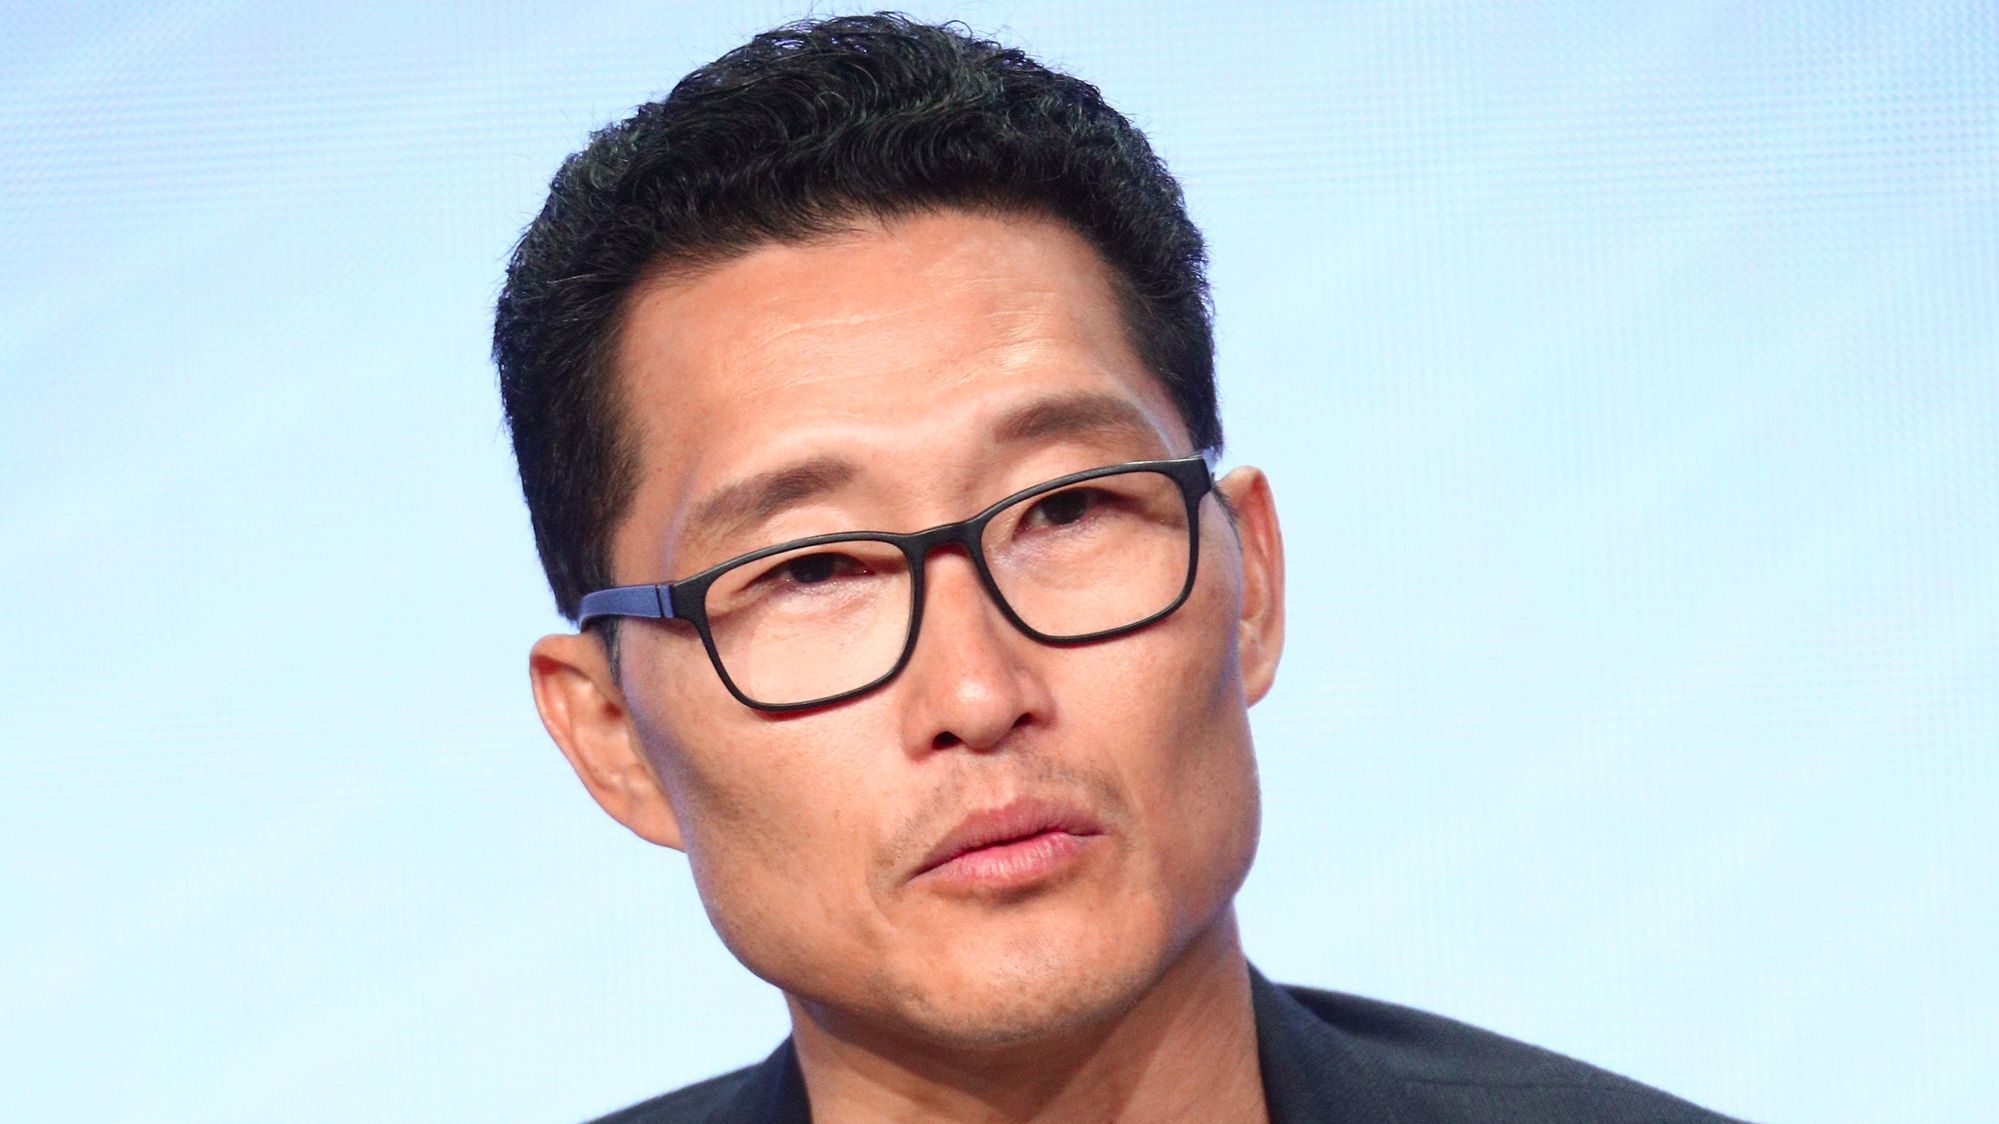 Executive producer Daniel Dae Kim of "The Good Doctor" speaks onstage during the Disney/ABC Television Group portion of the 2017 Summer Television Critics Assn. Press Tour. (Frederick M. Brown / Getty Images)